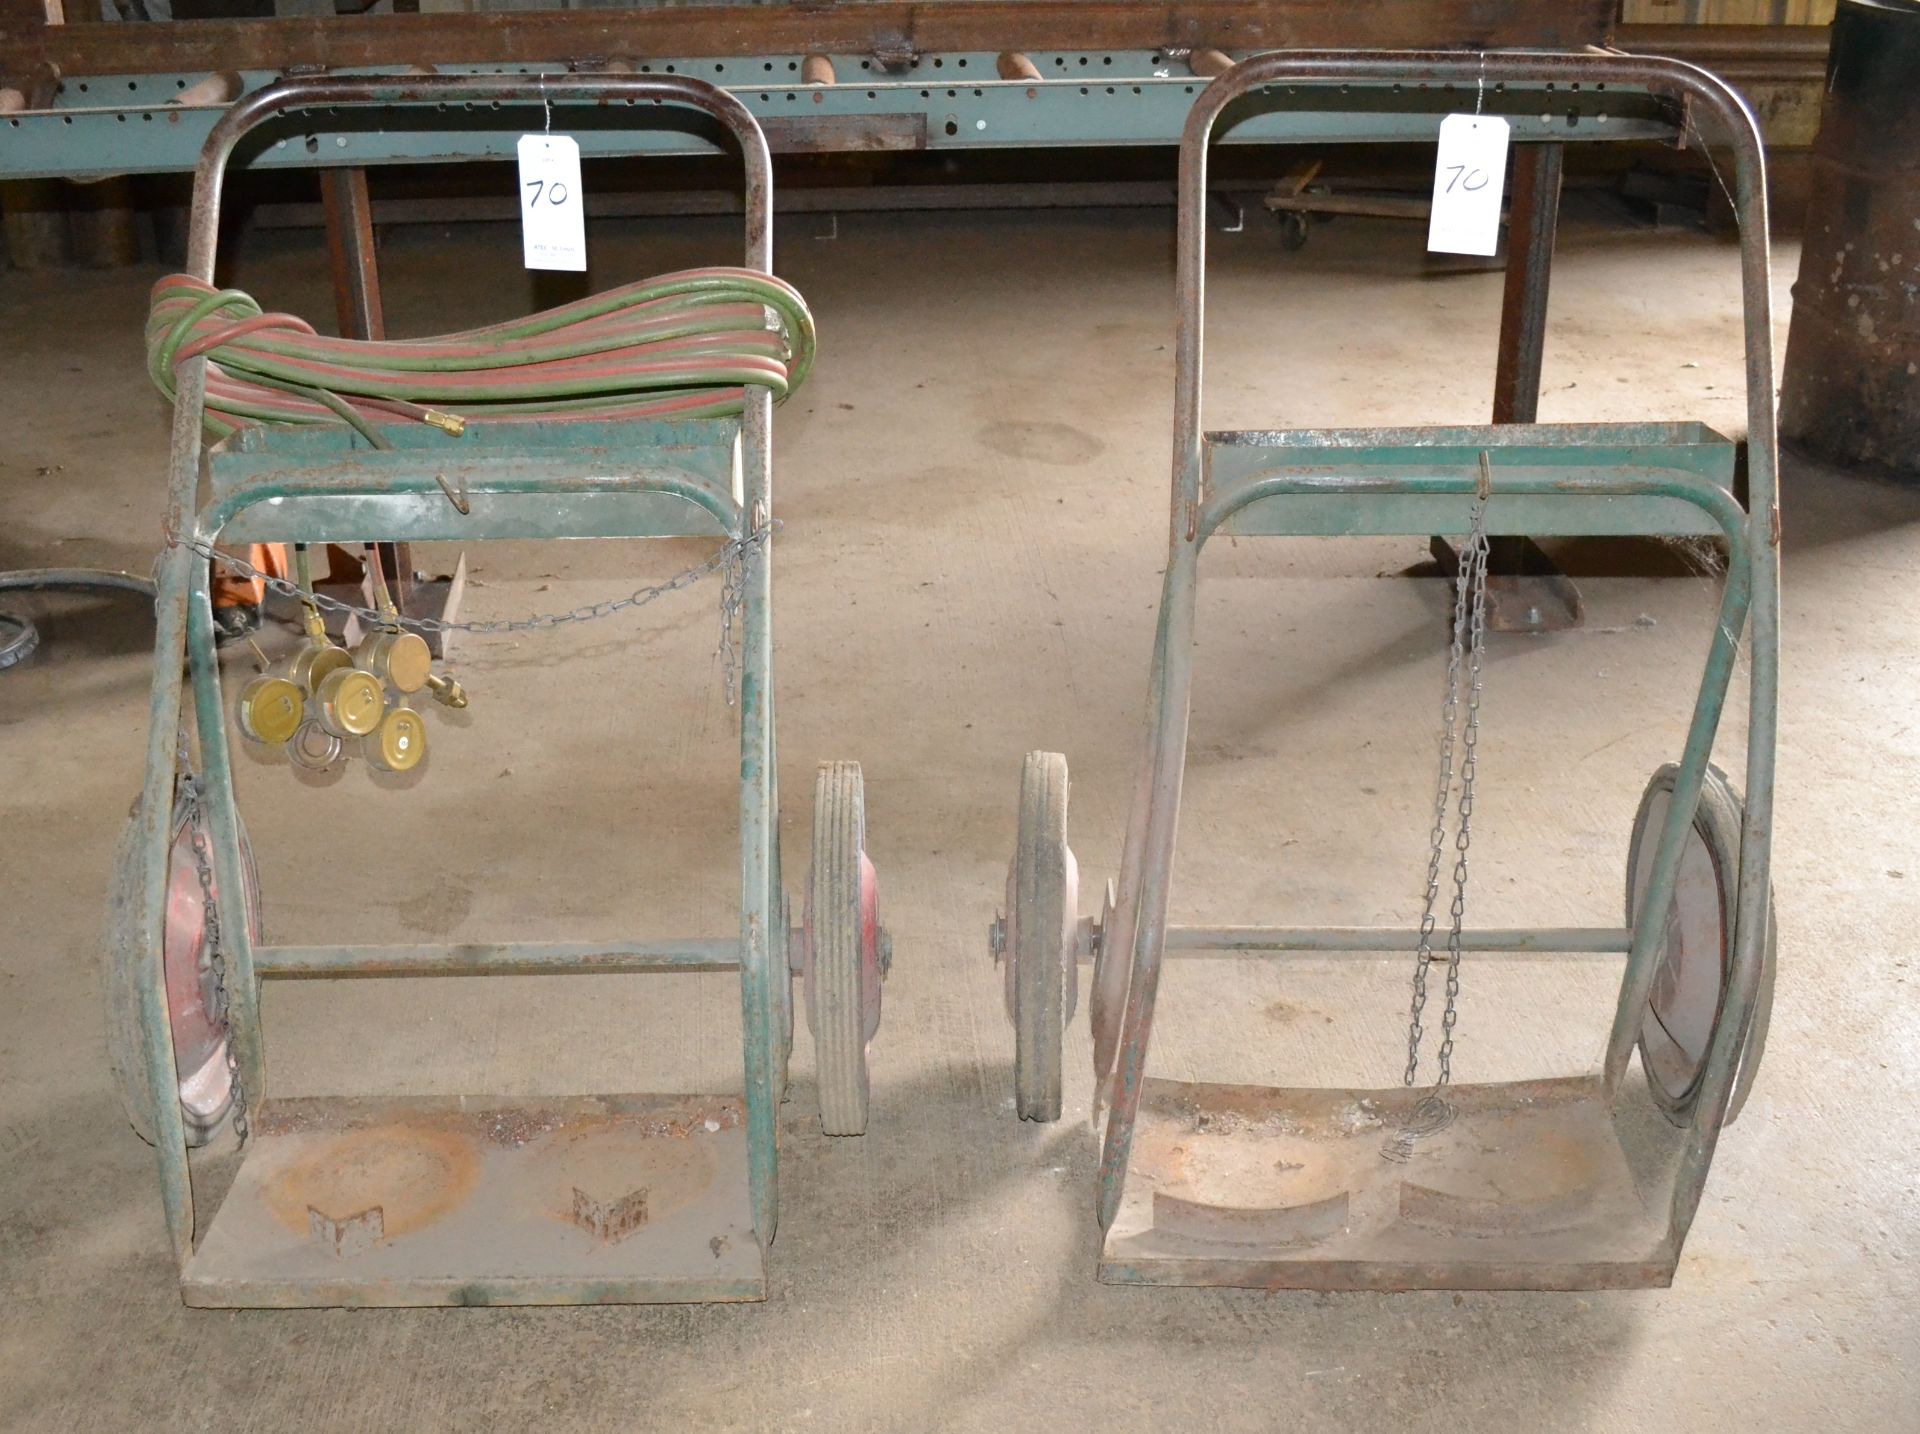 Lot Consisting of (2) Welding Carts With Hoses & Gauges